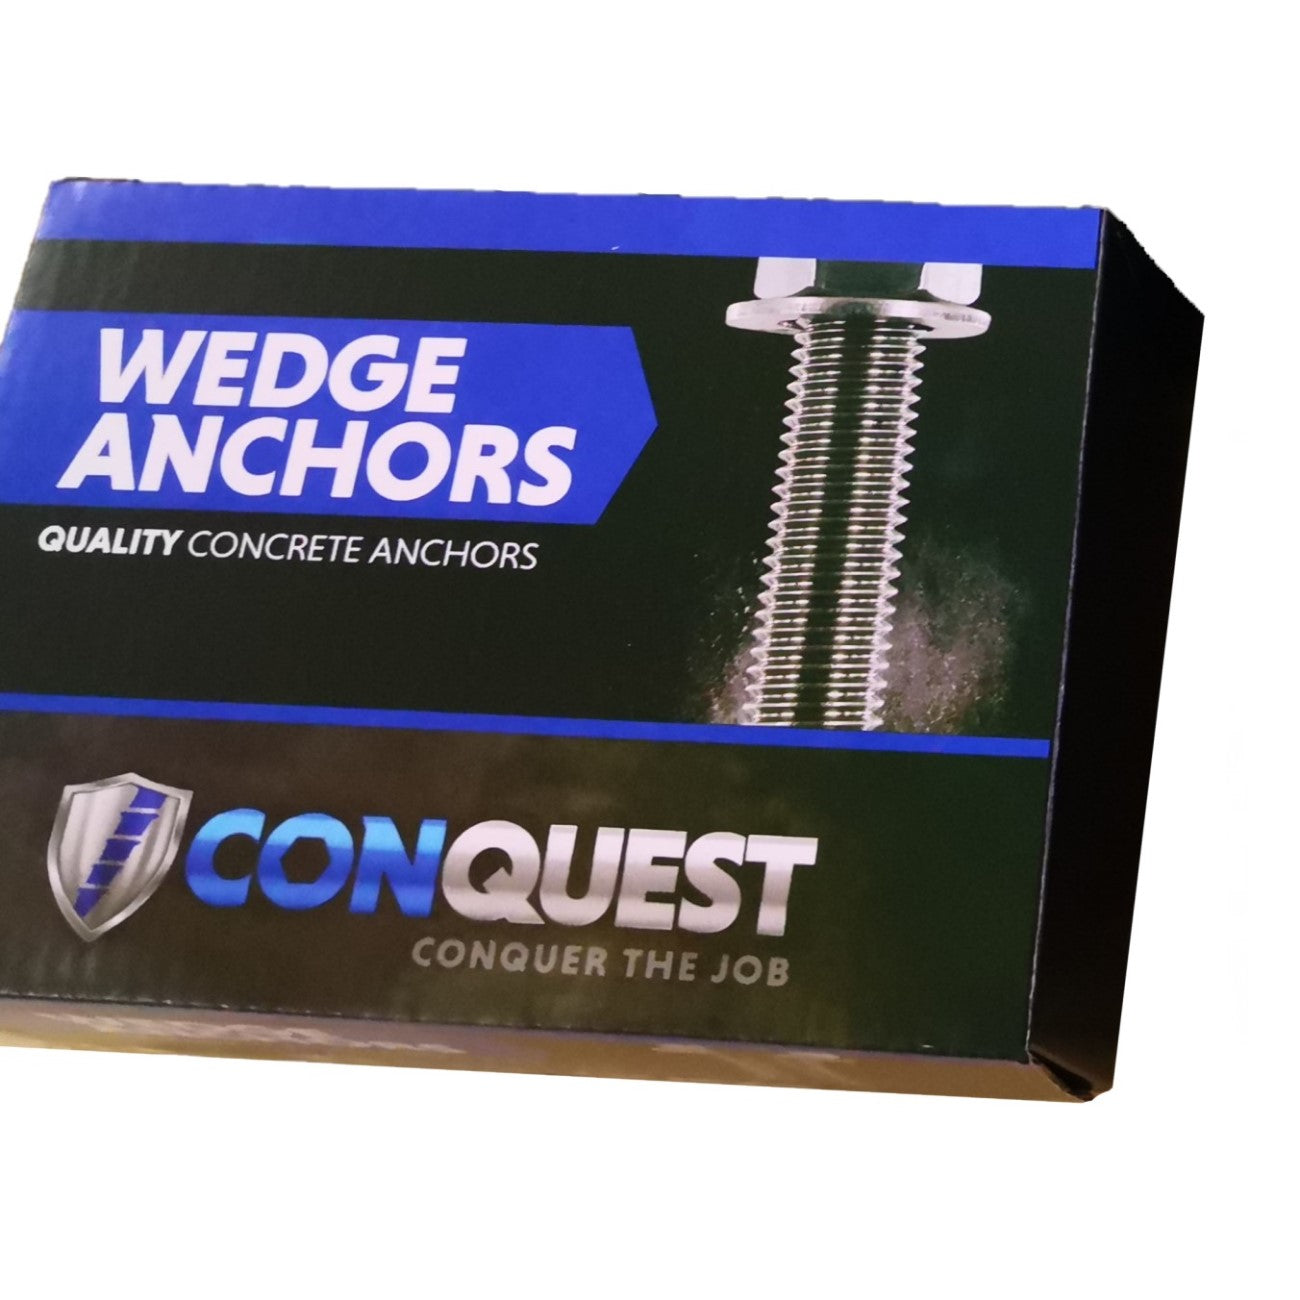 3/8" x 2-3/4" Conquest Wedge Anchors - 304 Stainless Steel, Pkg 50